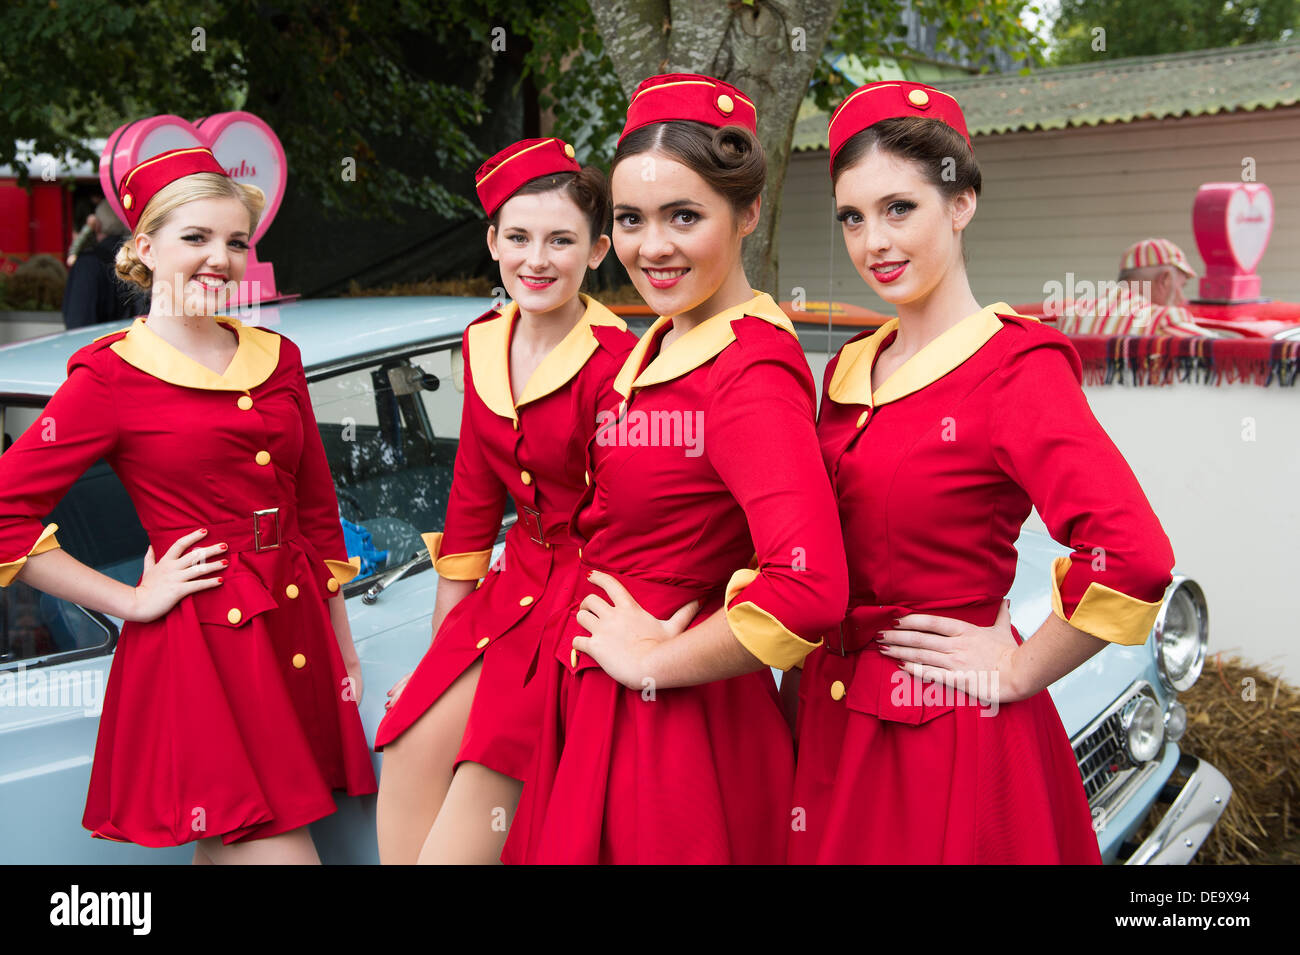 Chichester, West Sussex, UK. 13th Sep, 2013. Goodwood Revival. Goodwood Racing Circuit, West Sussex - Friday 13th September. Glamcabs girls pose for the camera in their red and gold uniforms. © MeonStock/Alamy Live News Stock Photo